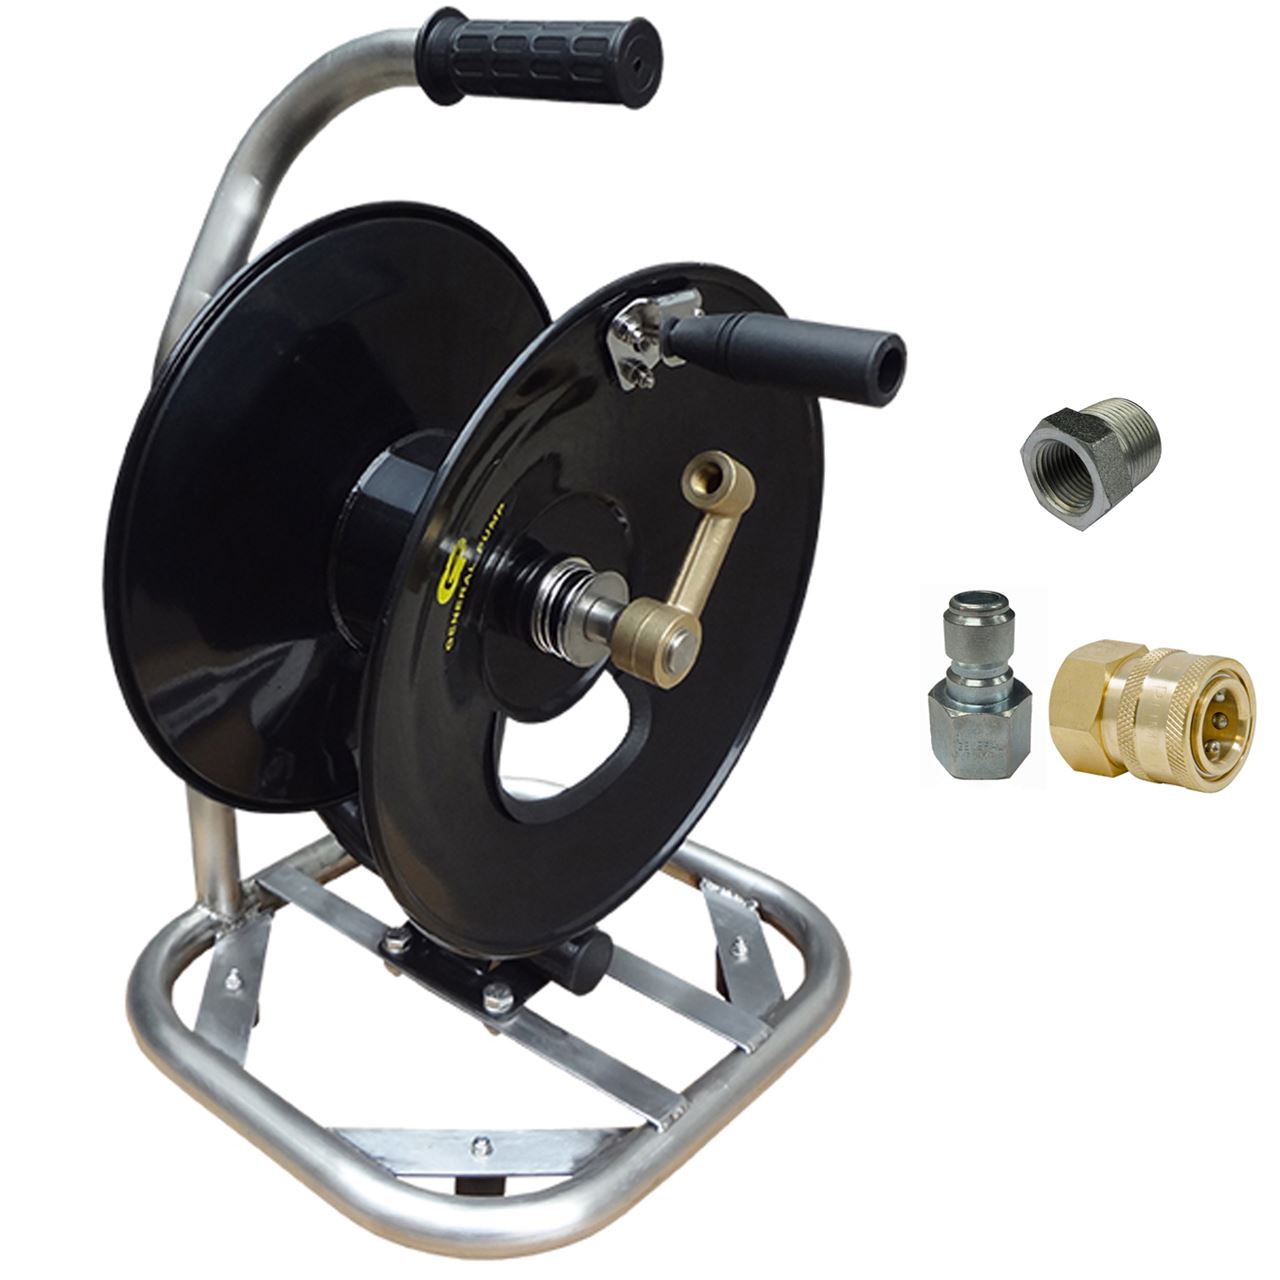 . PWMall-88.0269-Sewer Jetter Kit - HD Foot Valve